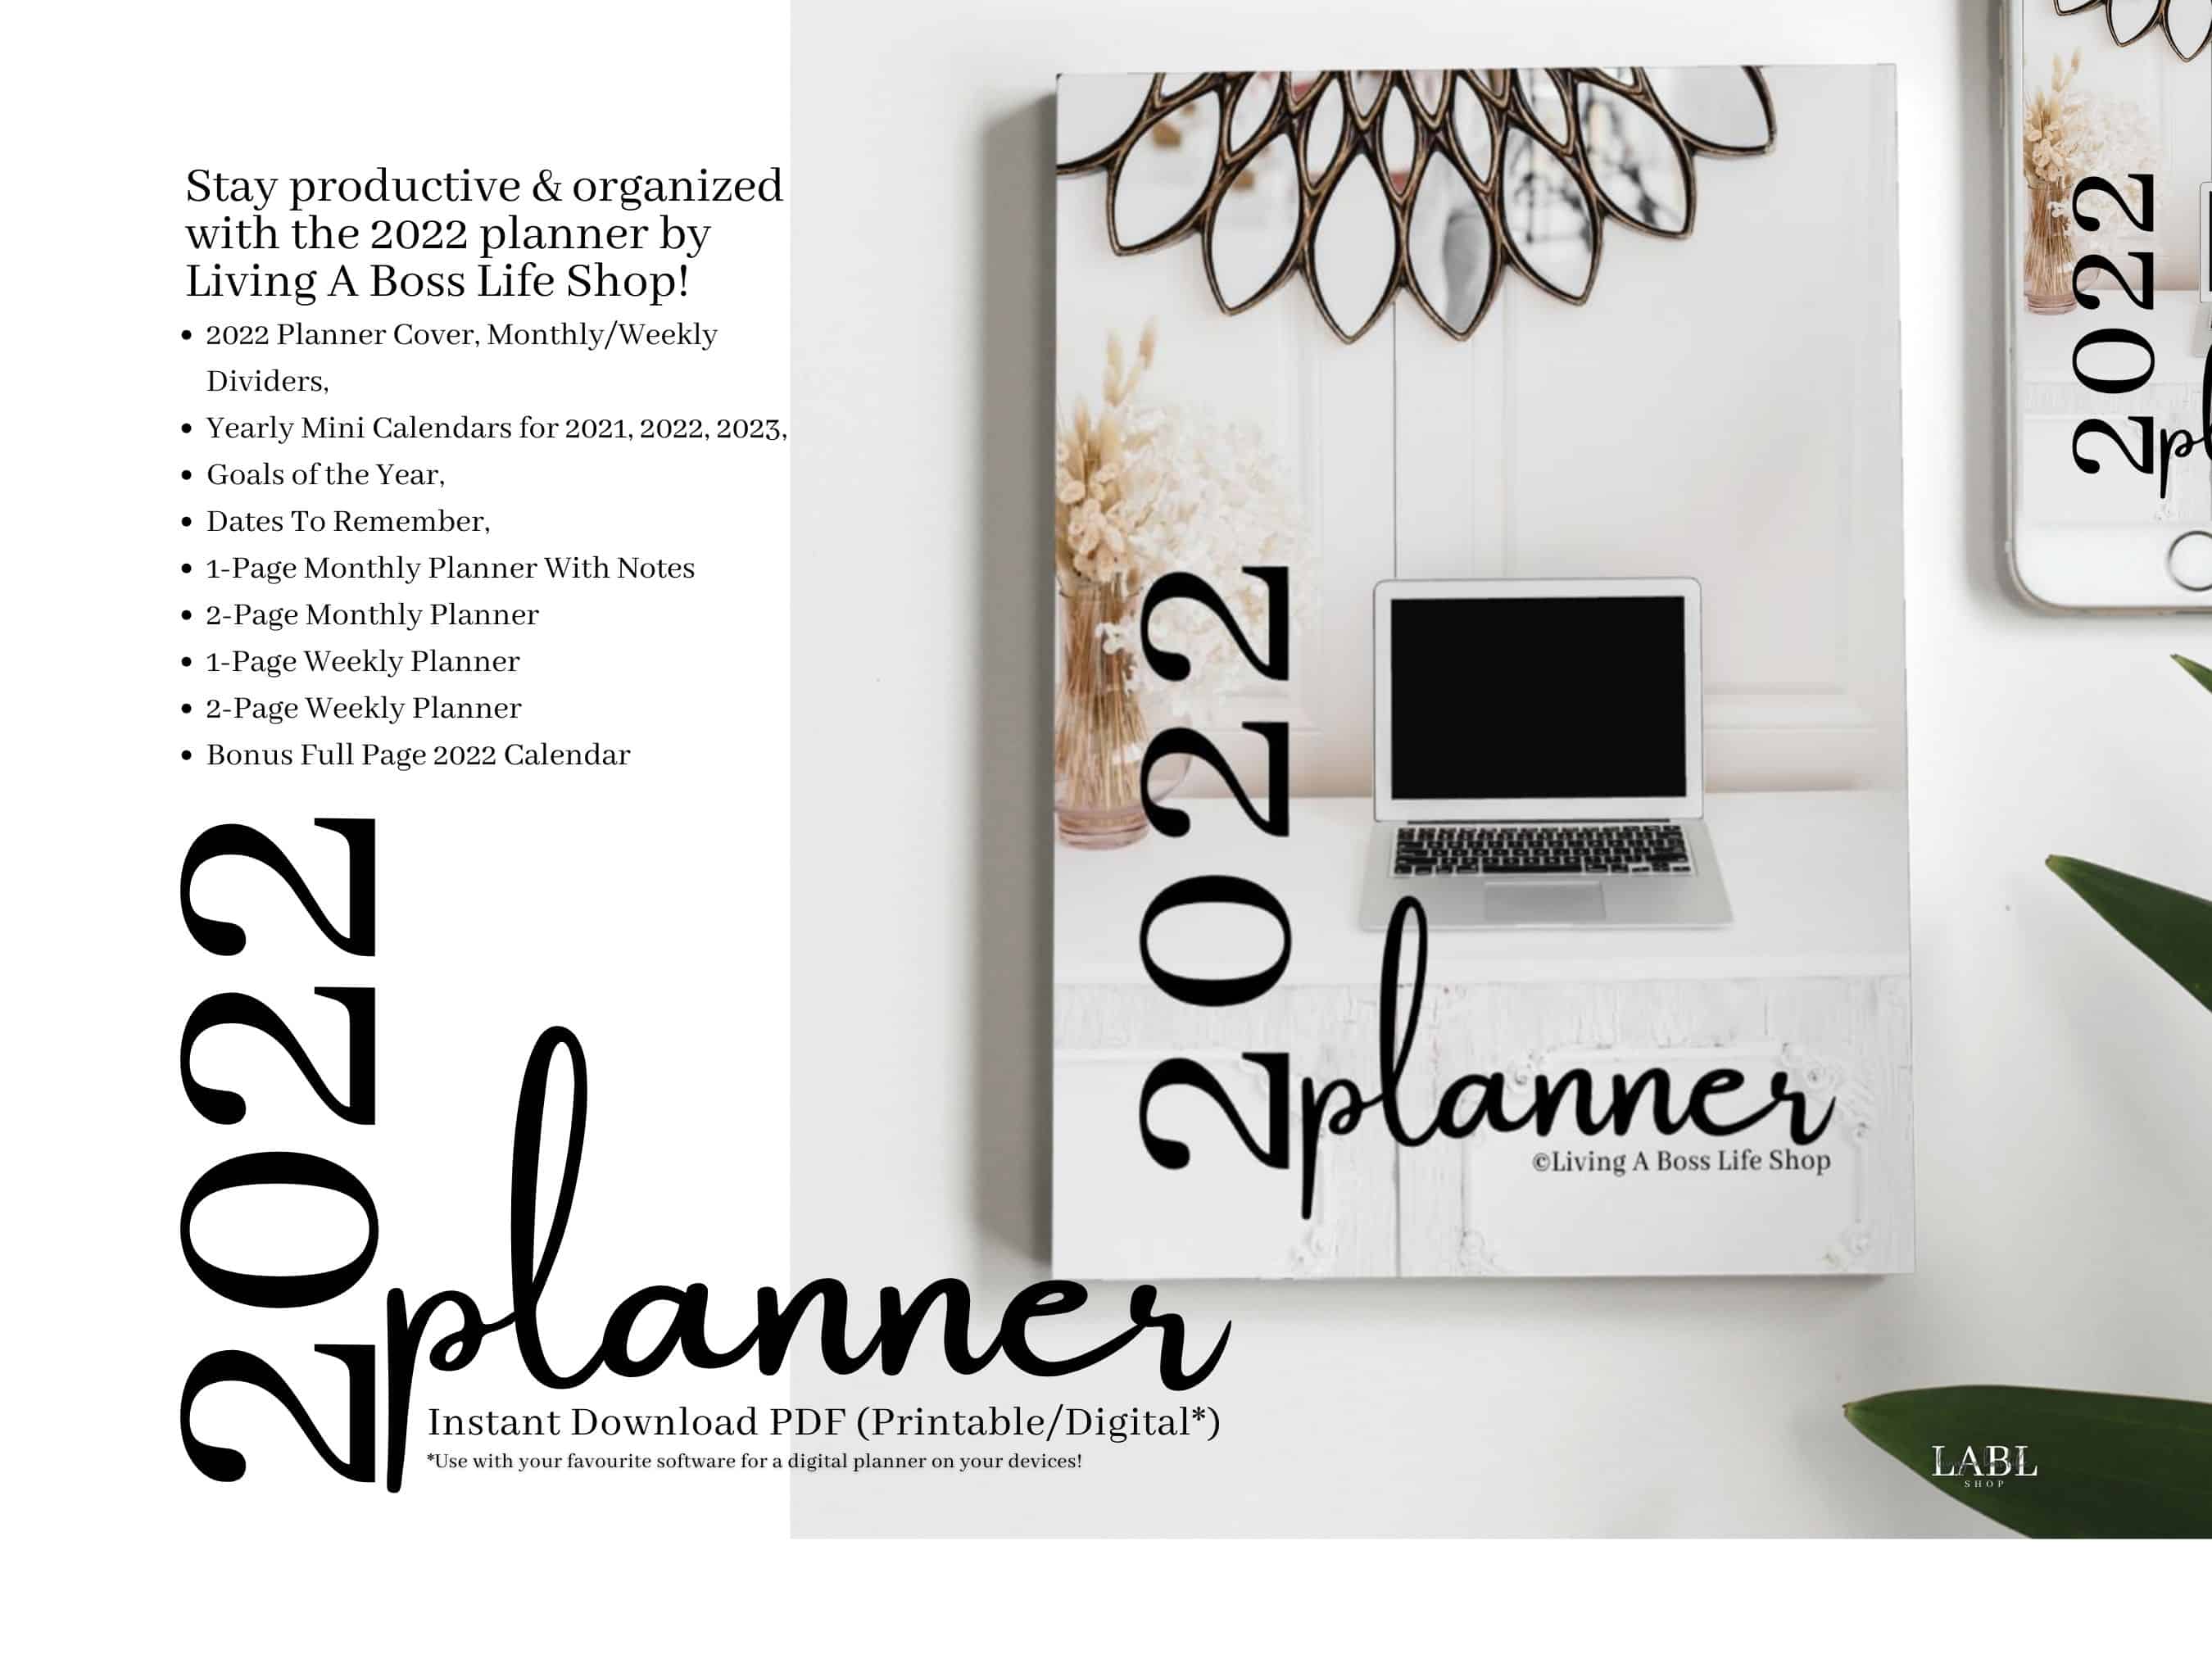 Introducing the 2022 Planner Printable PDF Yearly, Monthly, Weekly Planner and More 200+ pages! Yearly mini calendars bonus full size 2022 calendar, one page weekly planner, two page weekly planner, one page monthly calendar, two page monthly calendar, important dates to remember, notes and so much more! #PrintablePlanner #2022Planner #2022MonthlyPlanner #2022WeeklyPlanner #2022PrintablePlanner #PlannerRefills